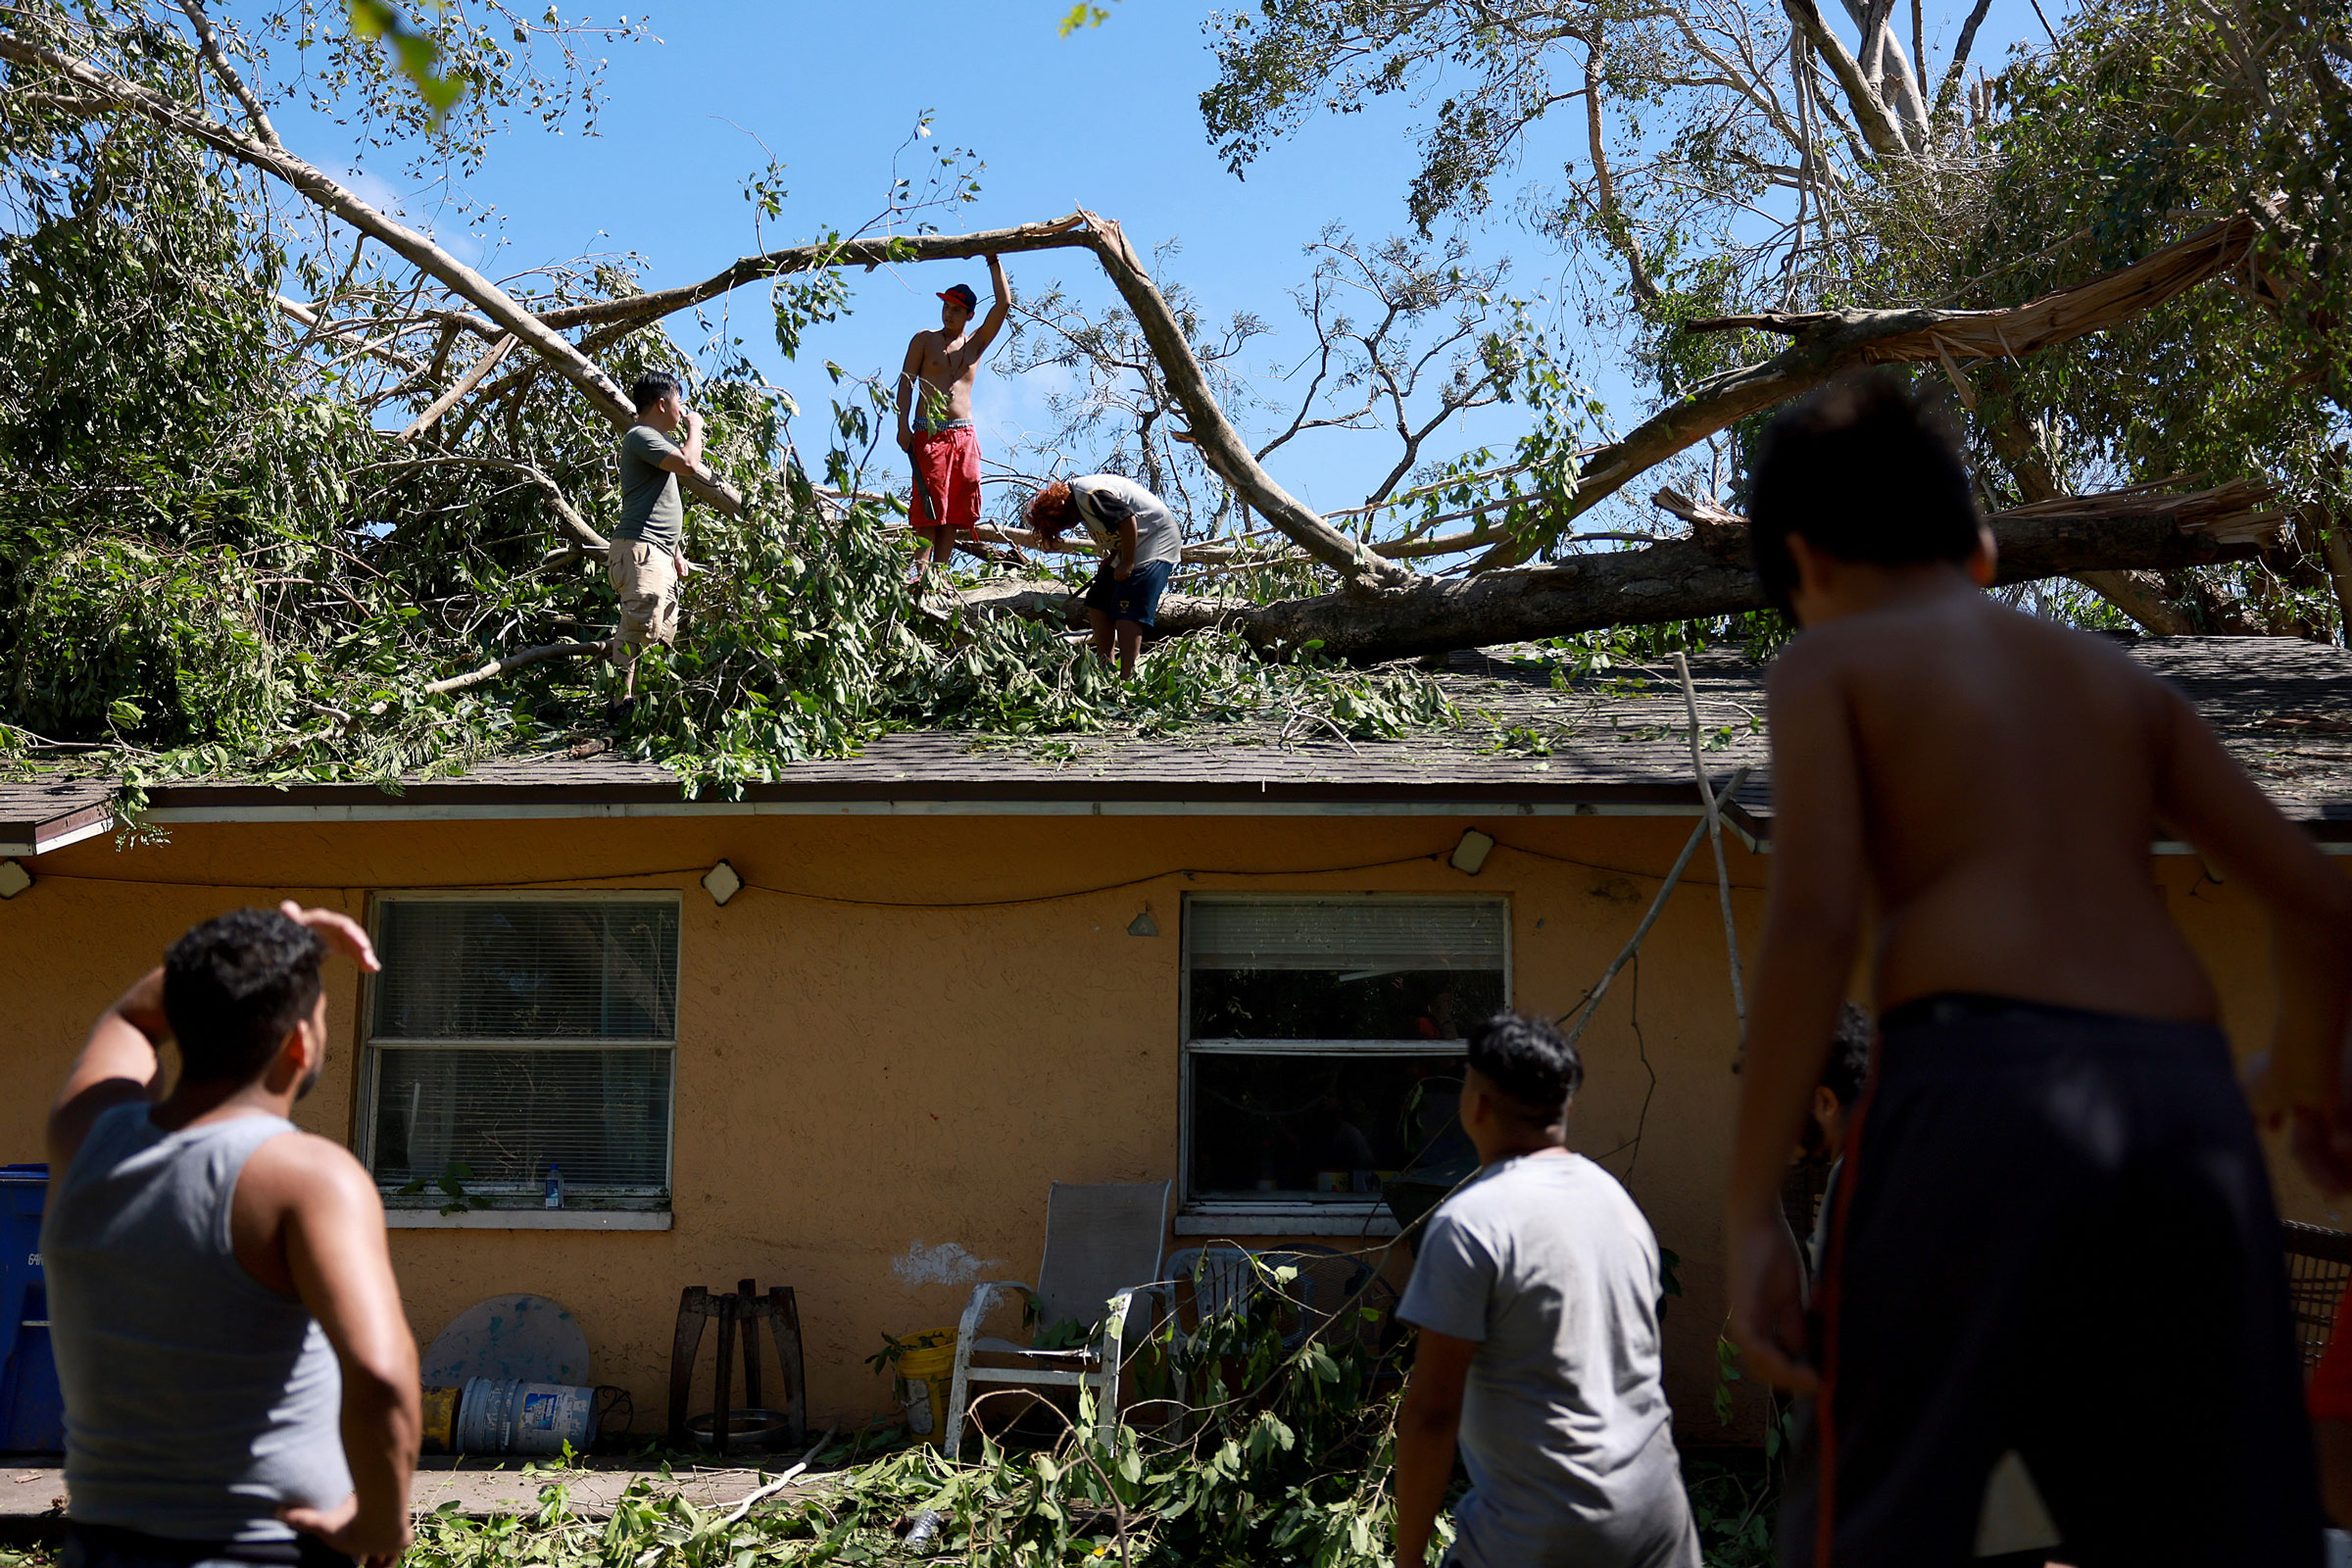 (L-R) Ken Pham, Lesman Varela, and Fernando Amador clear a large tree off their home after Hurricane Ian passed through on Sept. 29, 2022 in Fort Myers, Fla. (Joe Raedle—Getty Images)